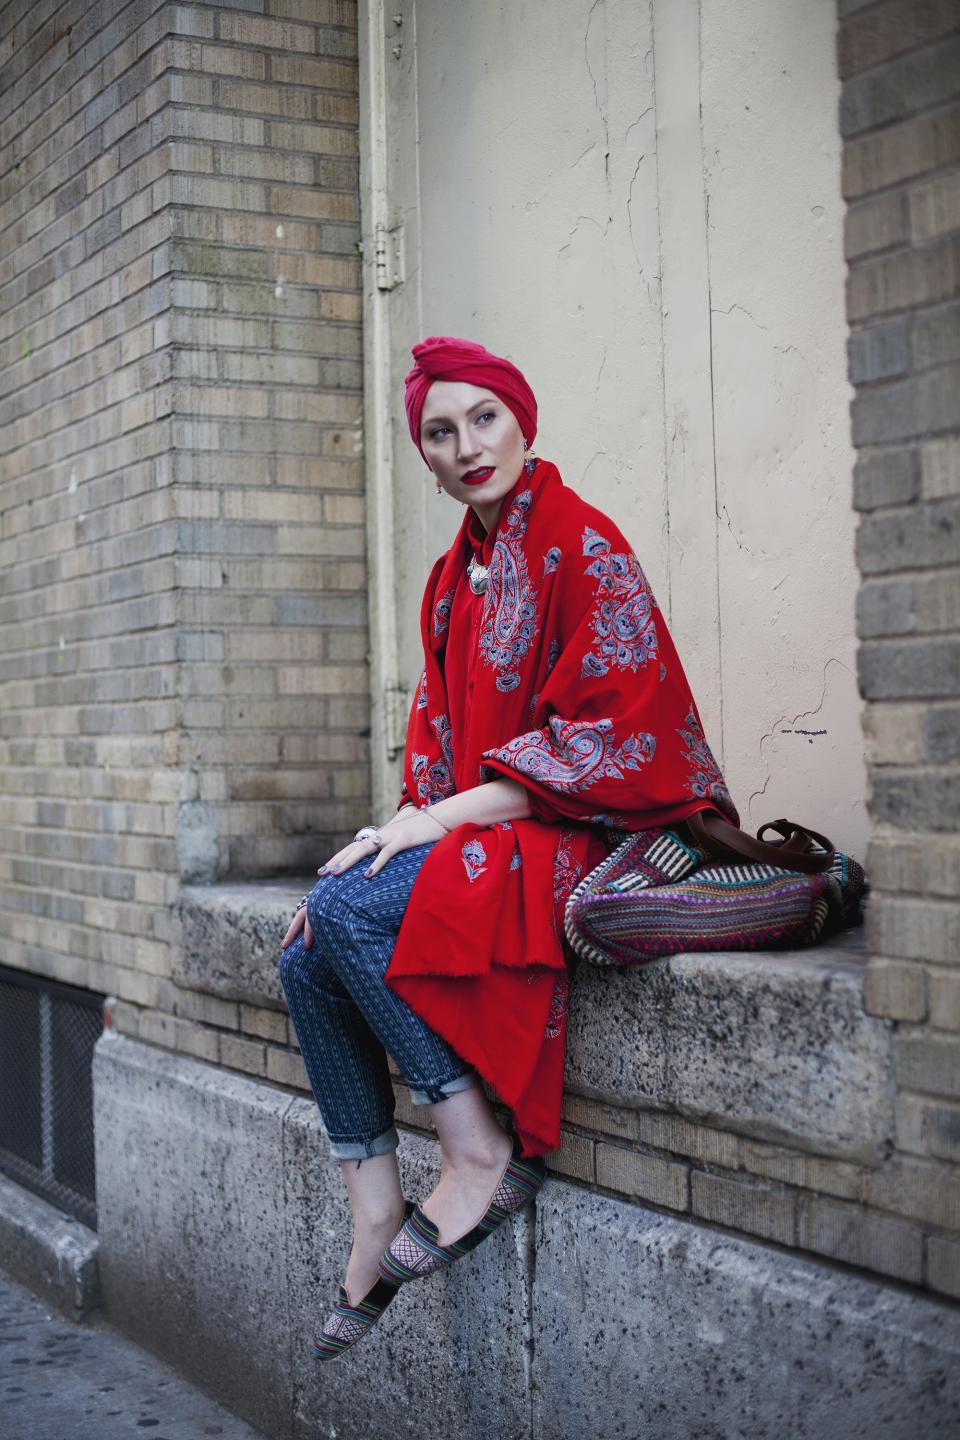 New York Minute, Feda Eid, Boston, visual artist, photographer, and style blogger, from Modest Street Fashion vol. 1, 2014, by Langston Hues (b. 1988, United States). Digital photo with Canon 5D Mark 1 and Mark 2 camera.